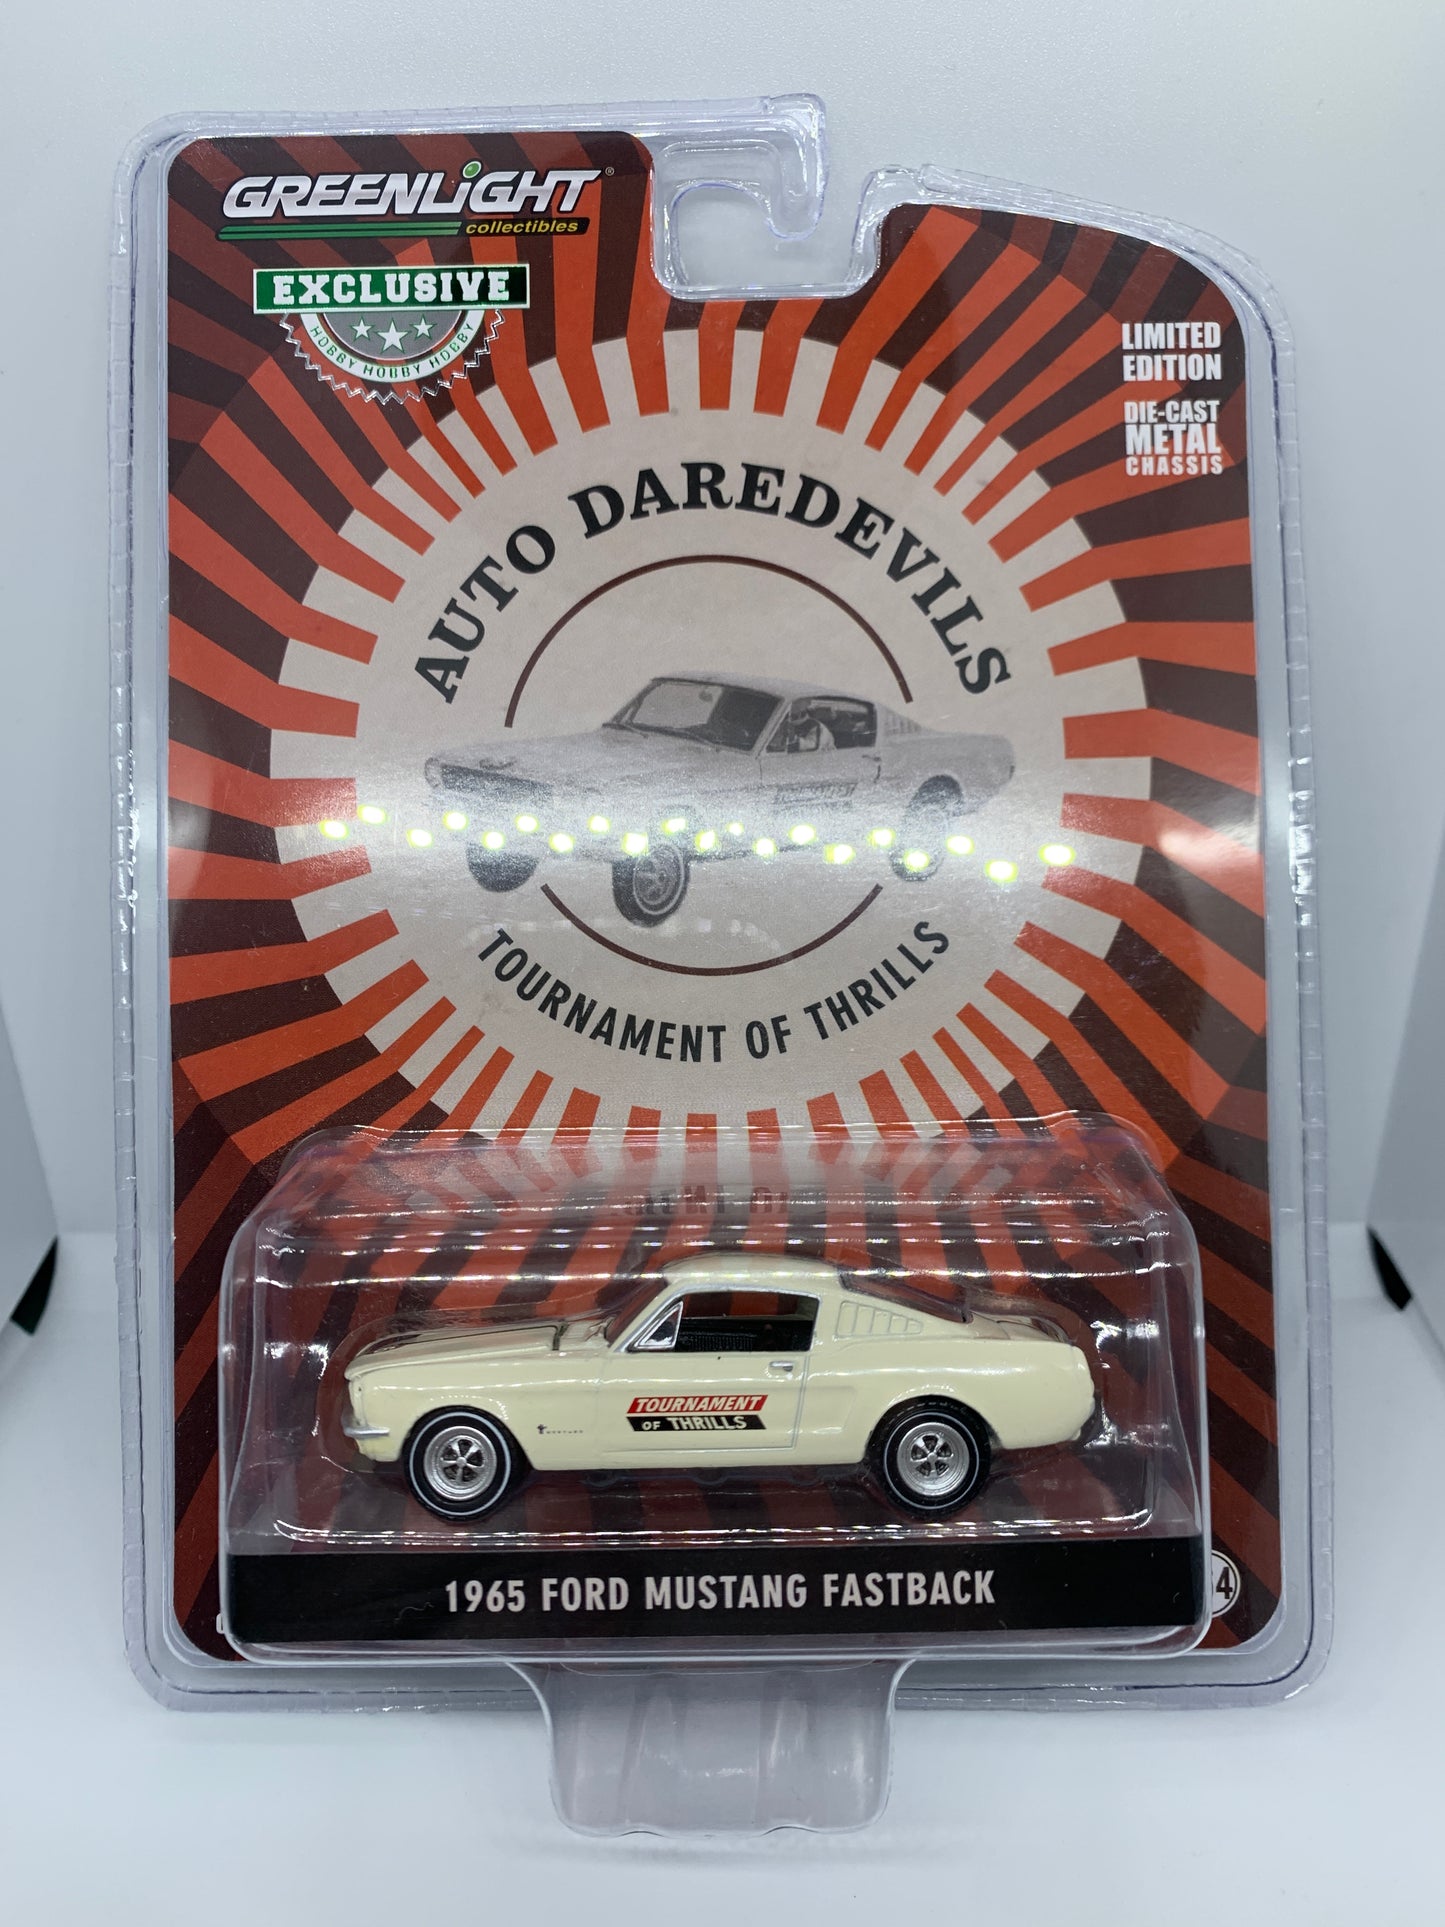 Greenlight - 1965 Ford Mustang Fastback - Hobby Lobby Exclusive